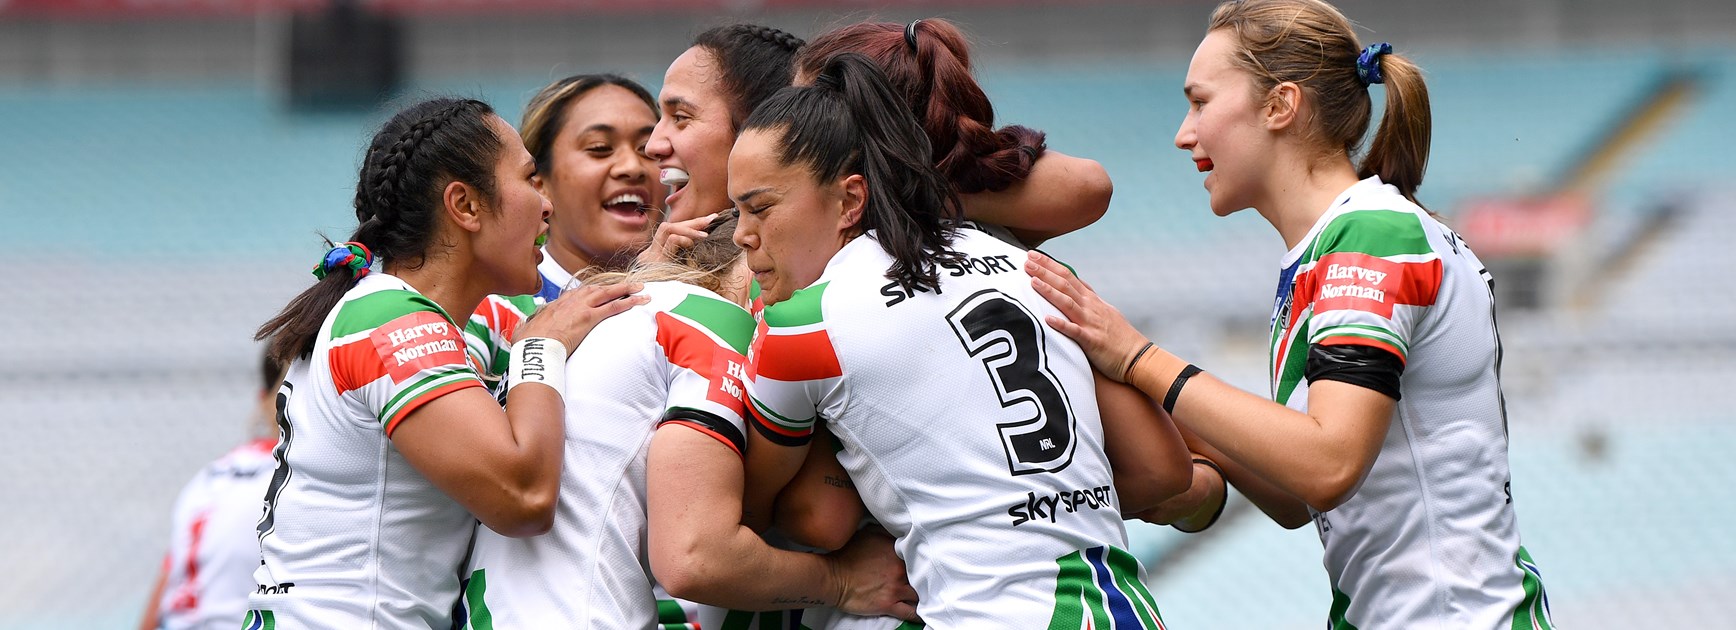 Warriors NRLW: 2020 by the numbers